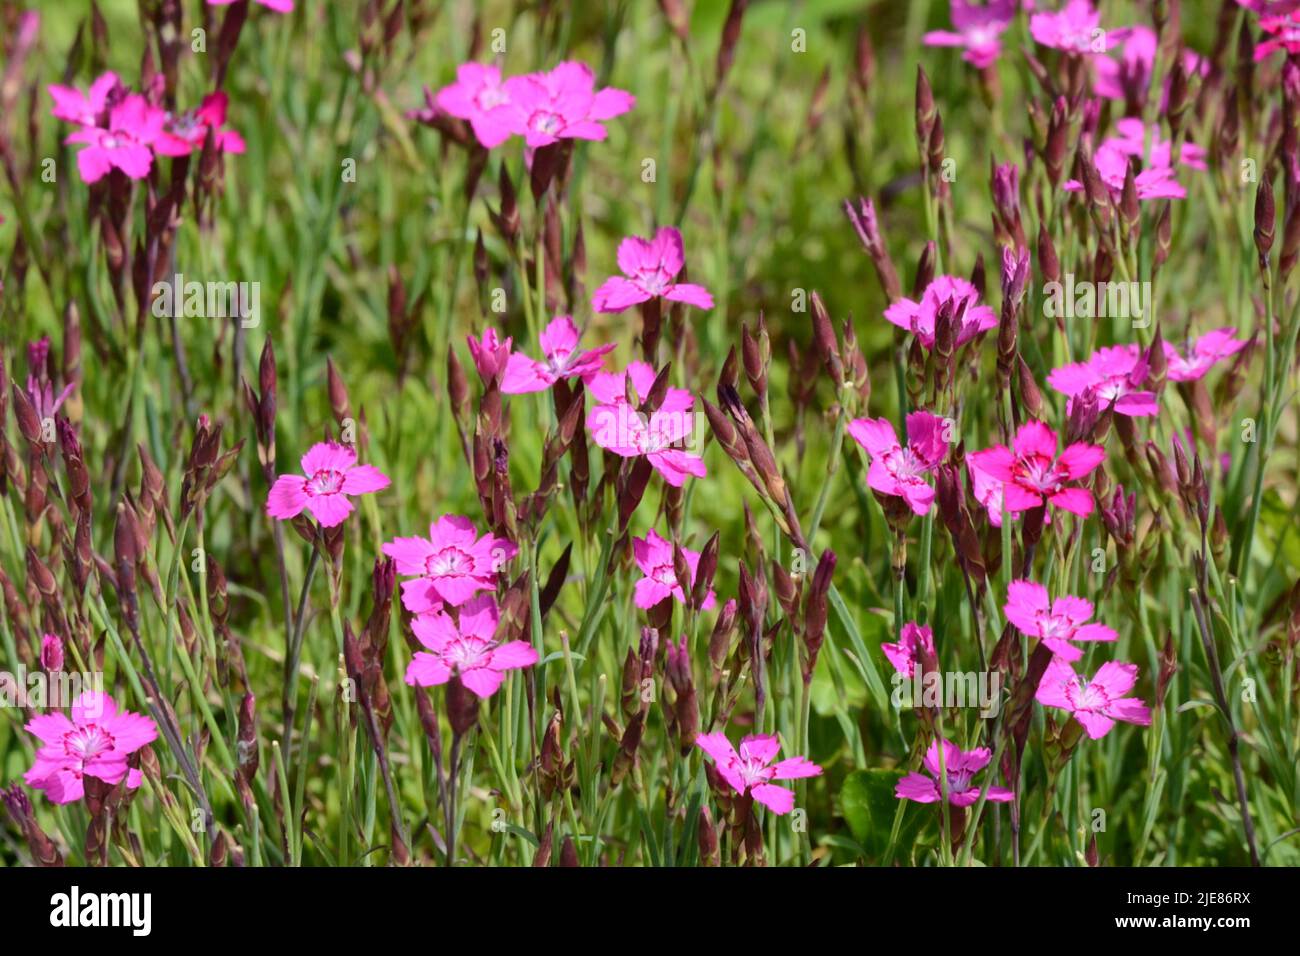 Dianthus myrtinervius Albania Pink single deep pink flowers with pale eye Stock Photo